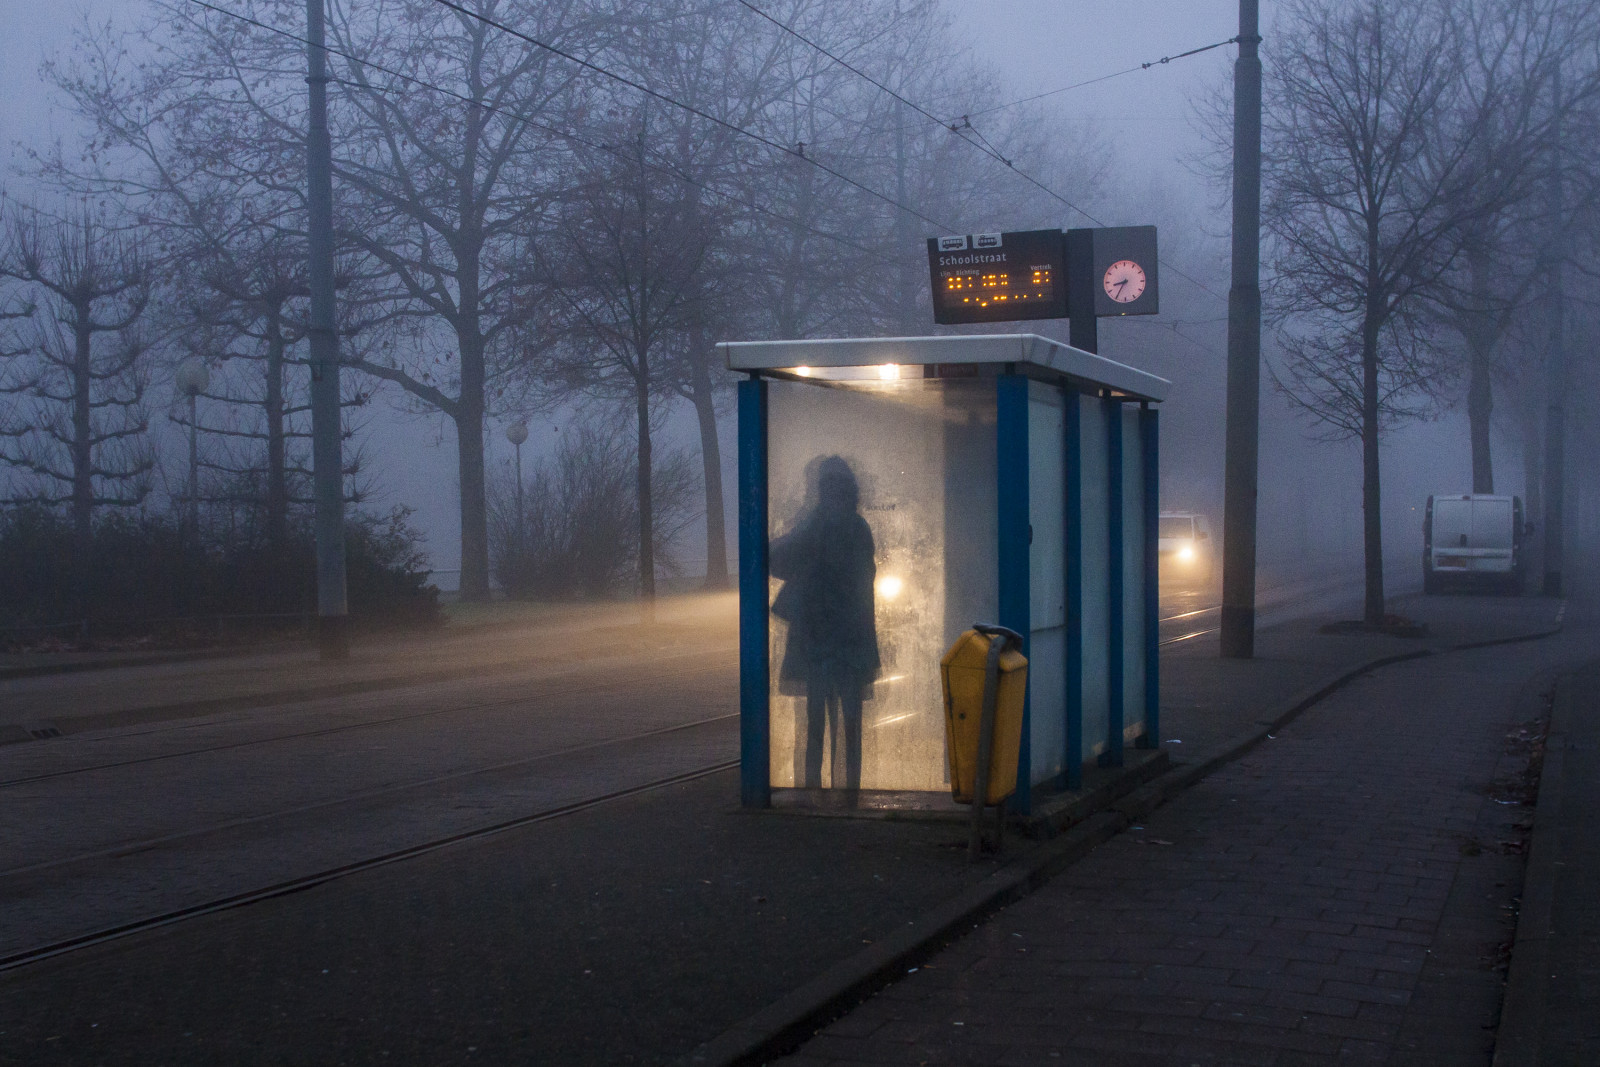 Dark Bus Stop People Standing Waiting Mist Loneliness Alone Dead Trees 1600x1067